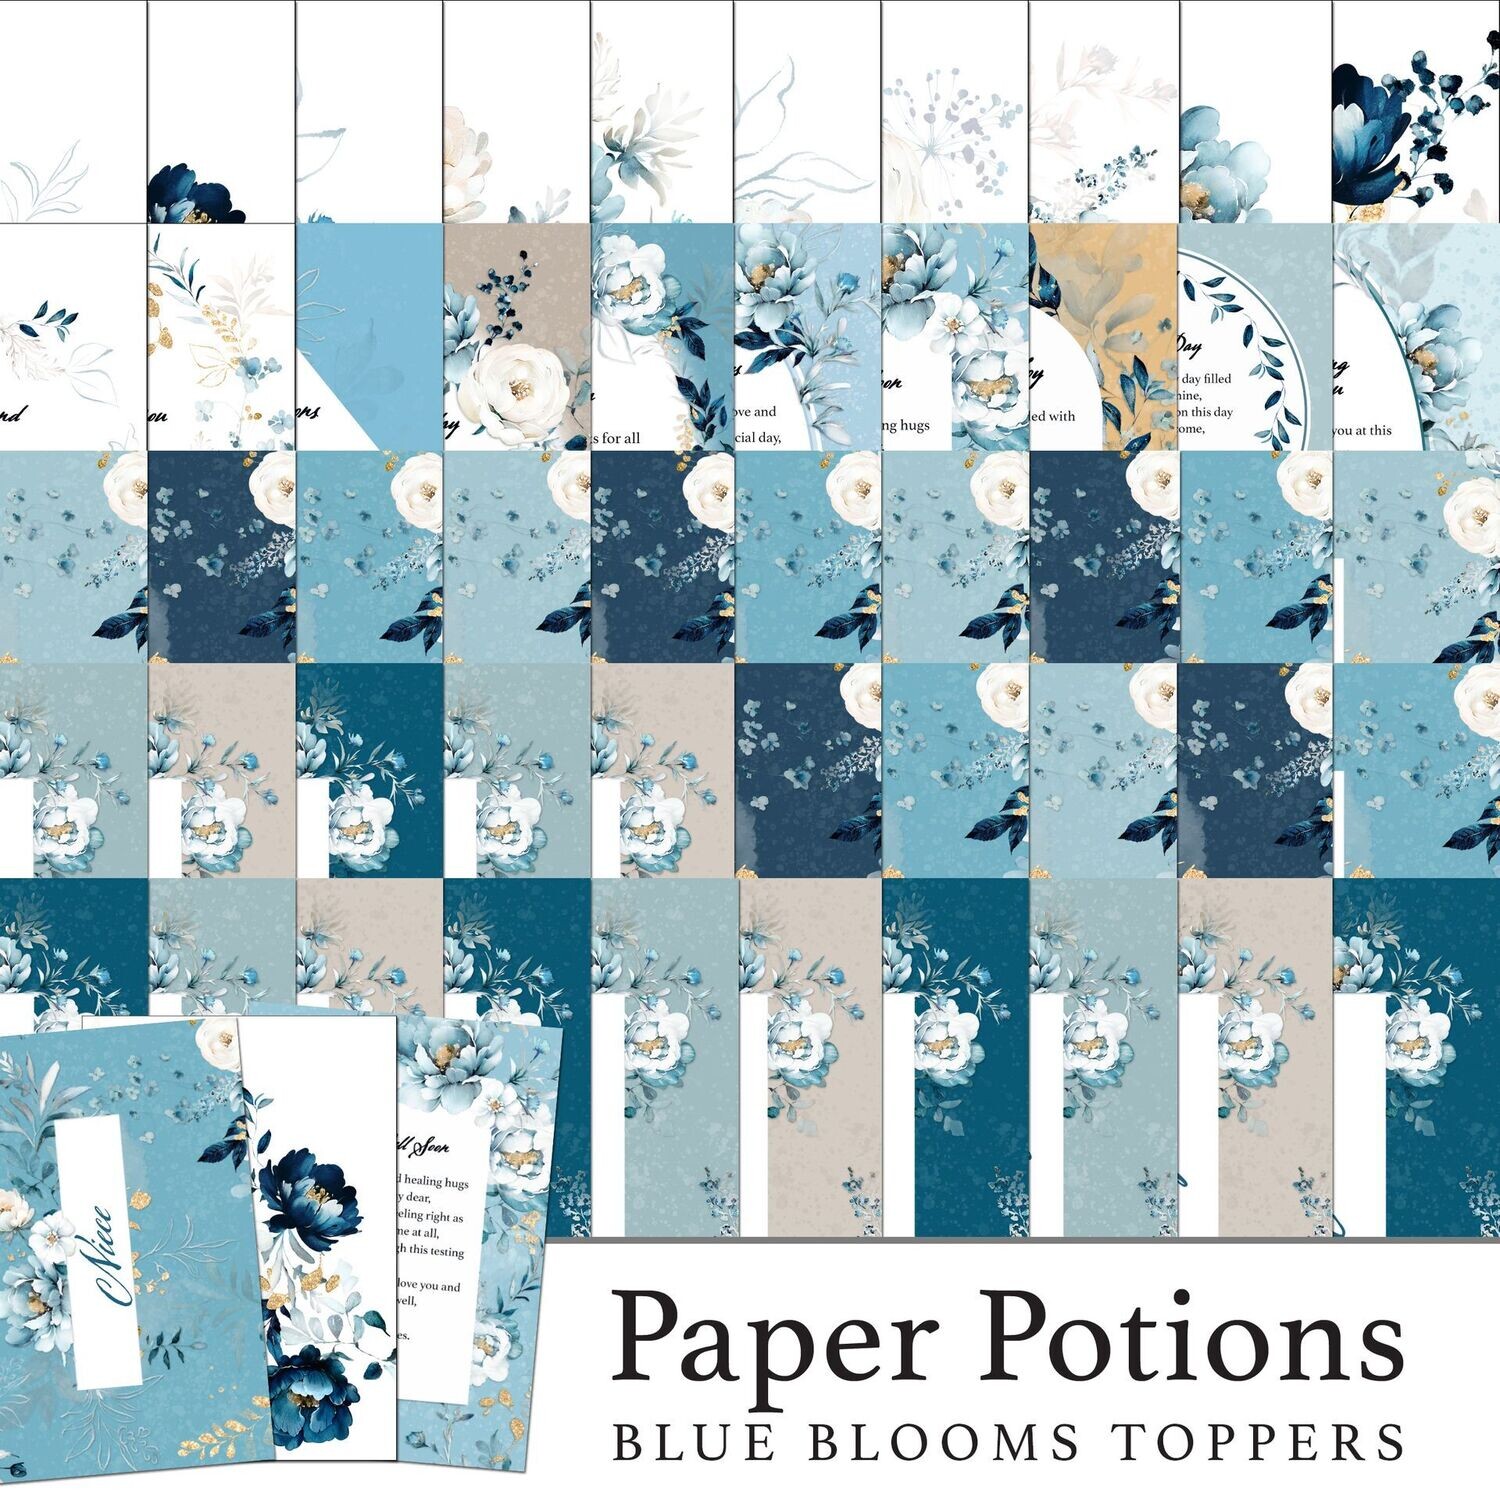 Paper Potions - Blue Blooms Toppers Digital Kit